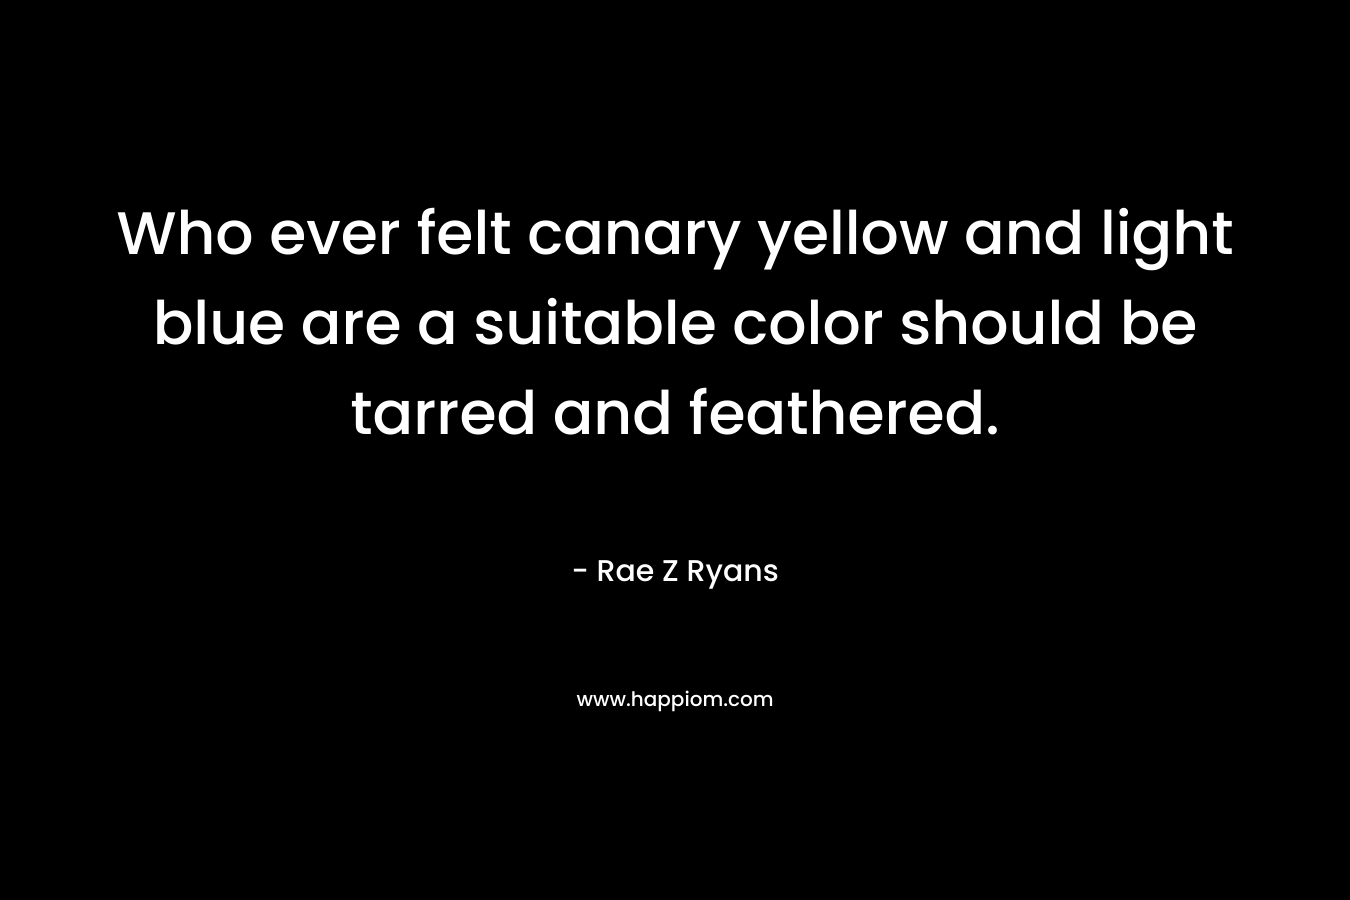 Who ever felt canary yellow and light blue are a suitable color should be tarred and feathered.